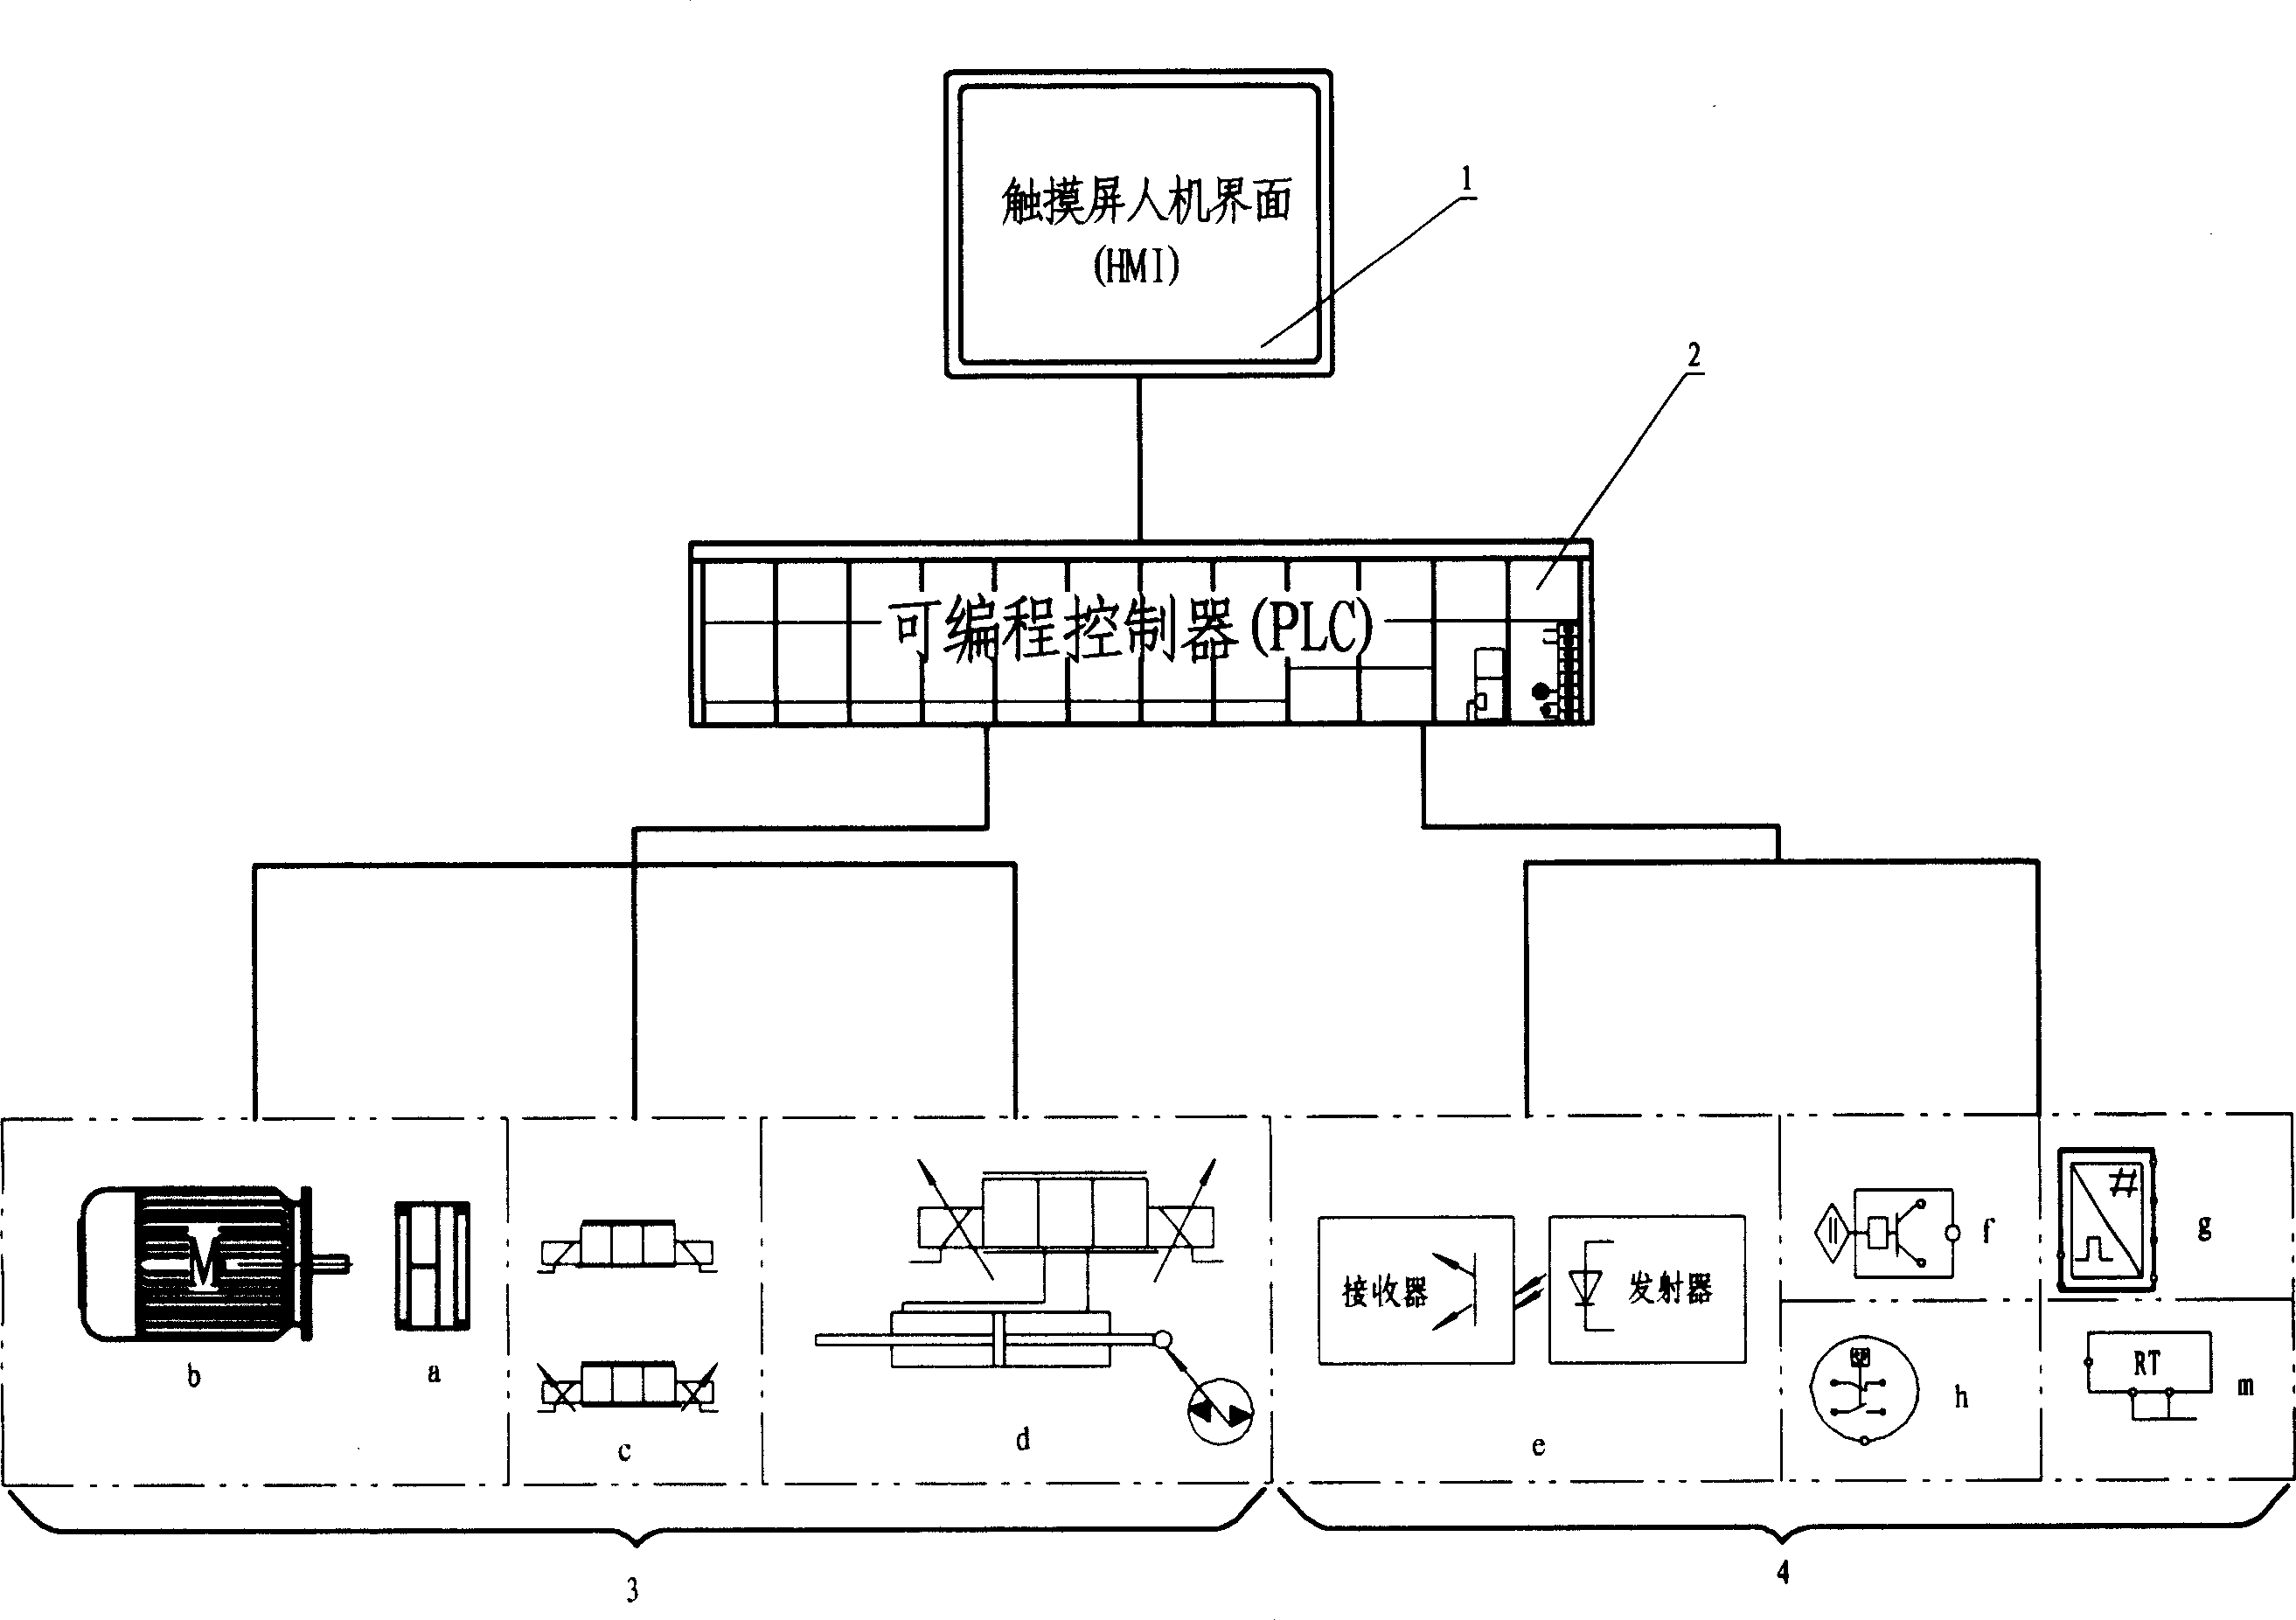 Numerical Control system of numerical controlled press for shaping ship plates